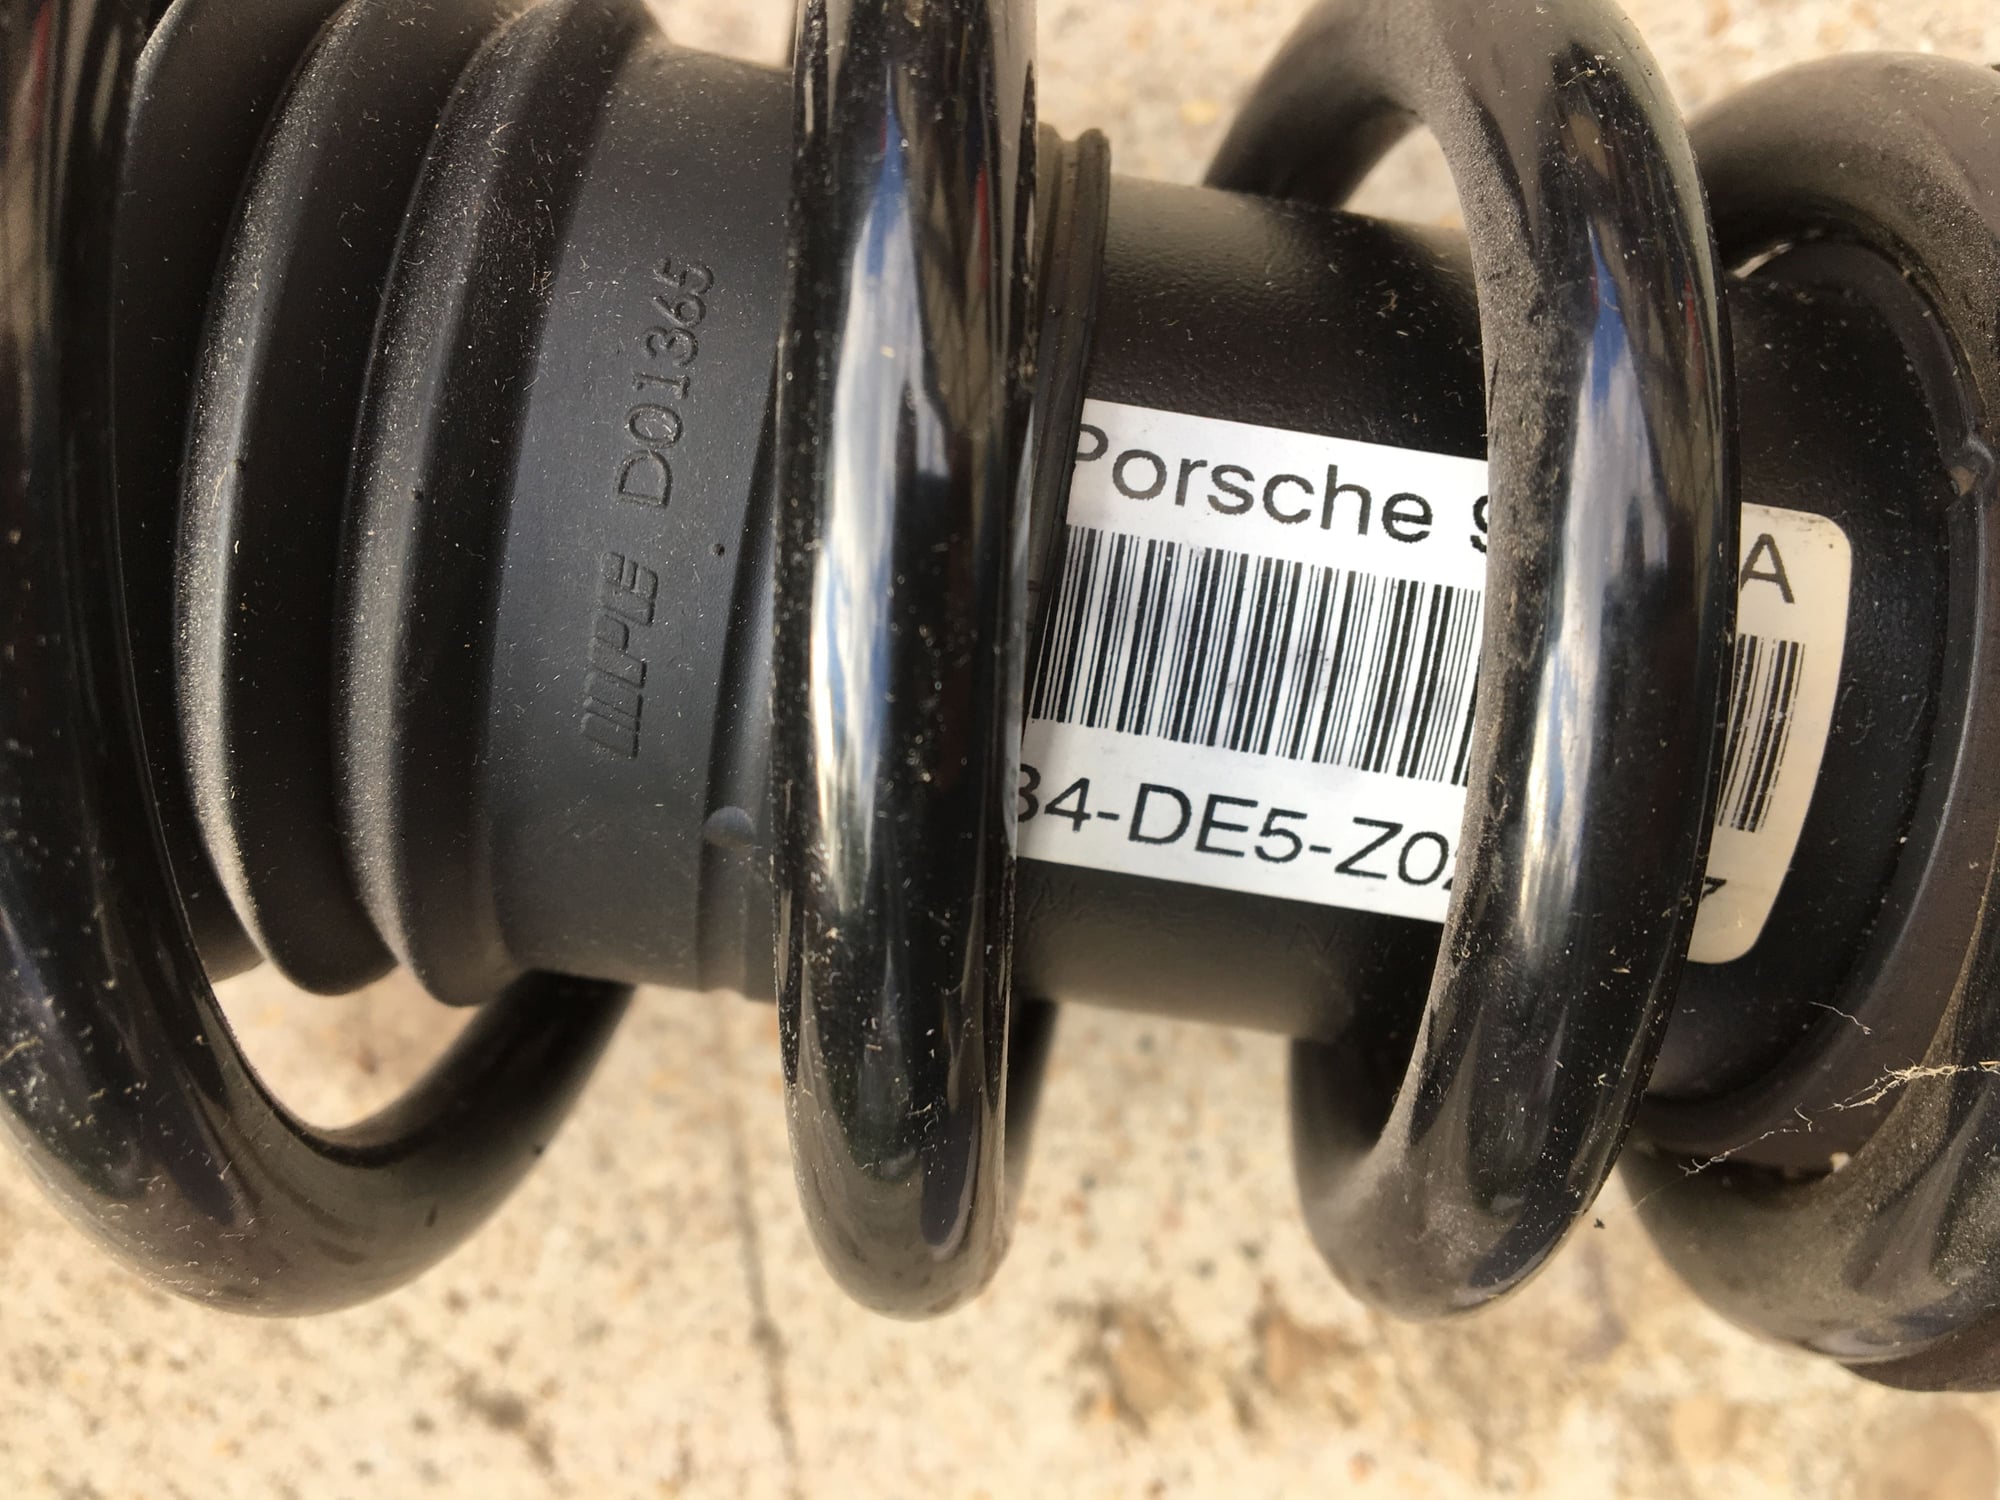 Steering/Suspension - FS: 981 OEM Sport Suspension Front and Rear Struts - Used - 2013 to 2019 Porsche Boxster - 2014 to 2019 Porsche Cayman - Naperville, IL 60563, United States